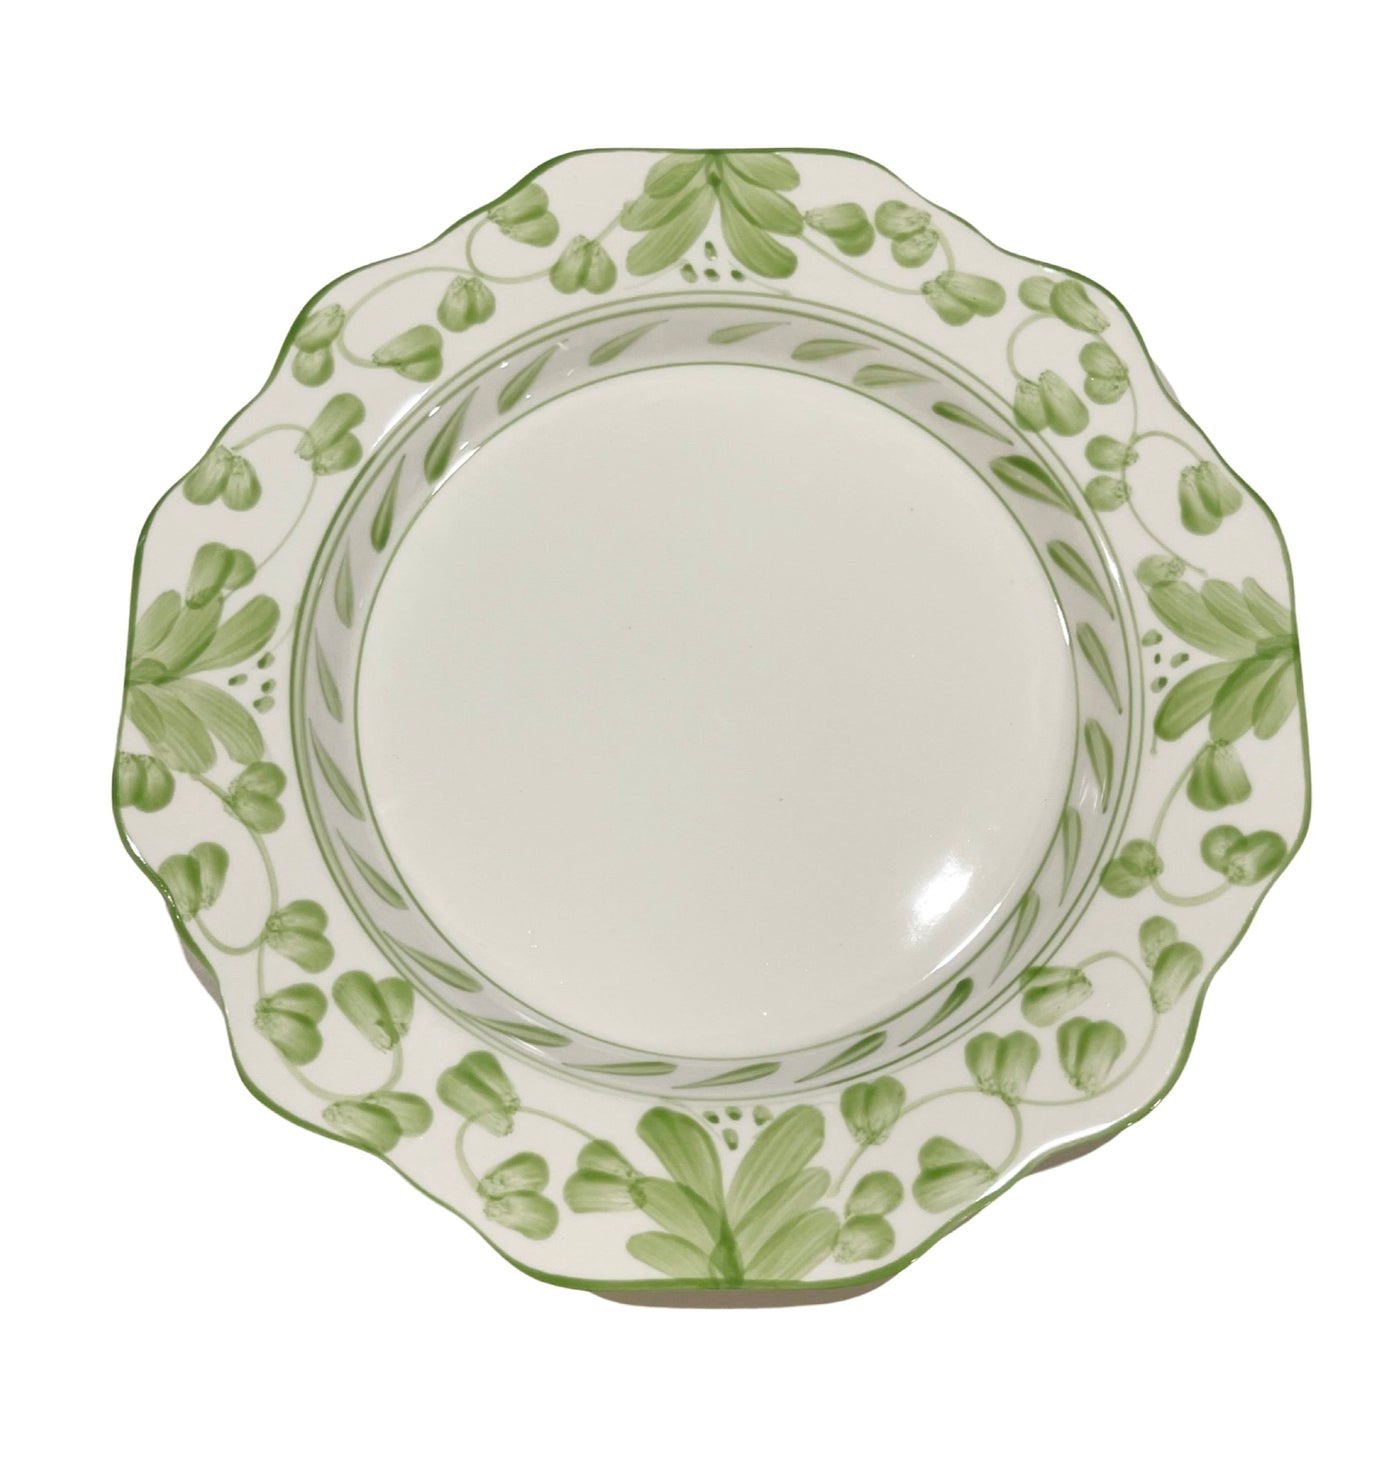 'Lily' Salad/Bread Plate - Green